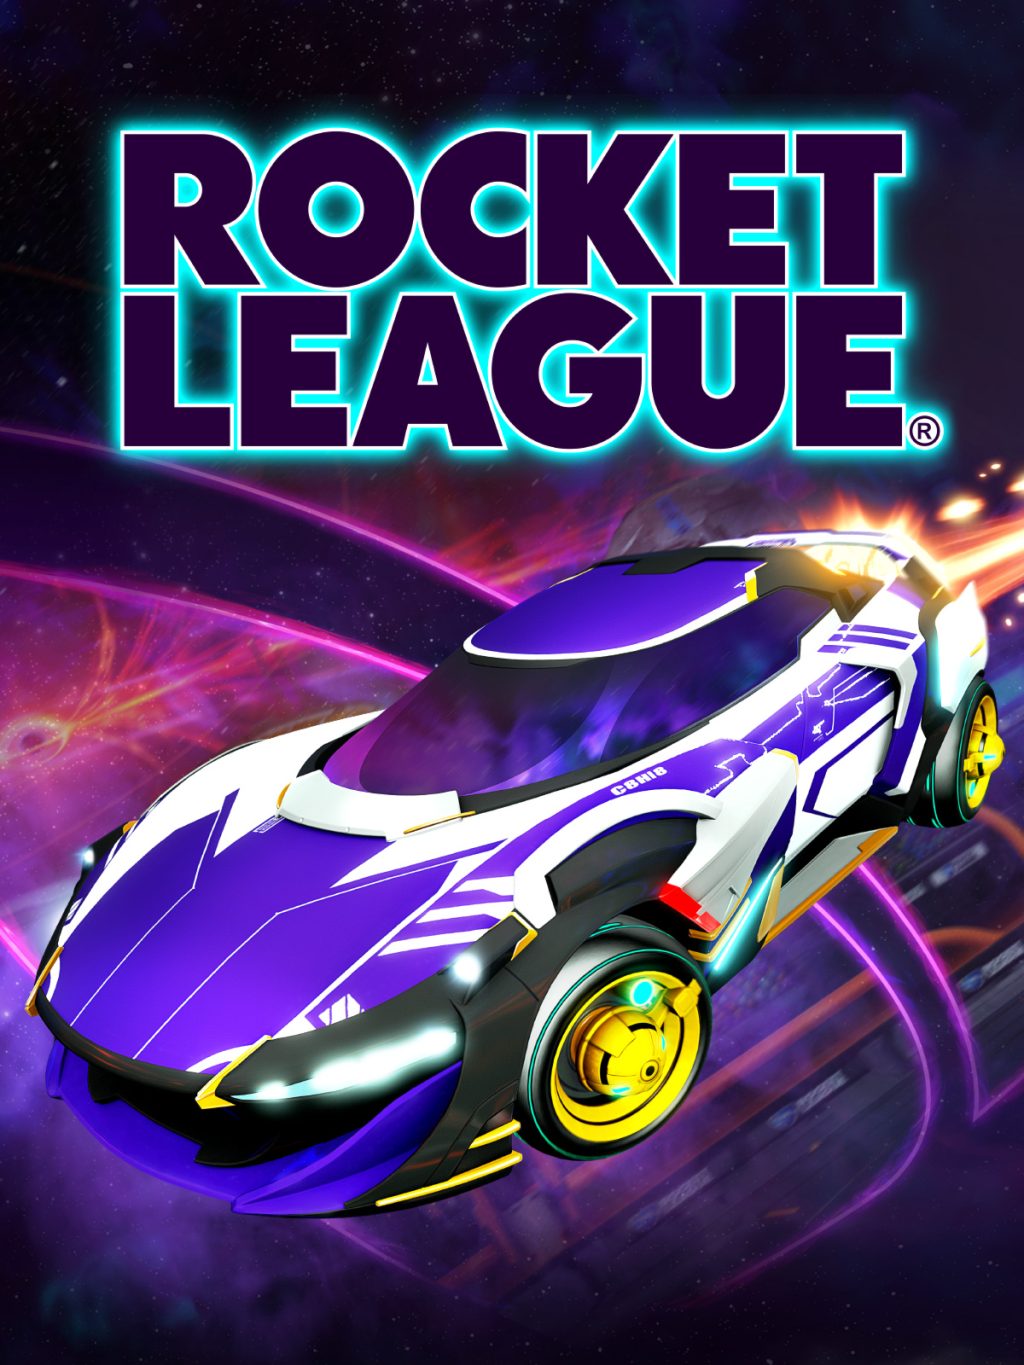 Here comes the new free version of Rocket League for mobile devices